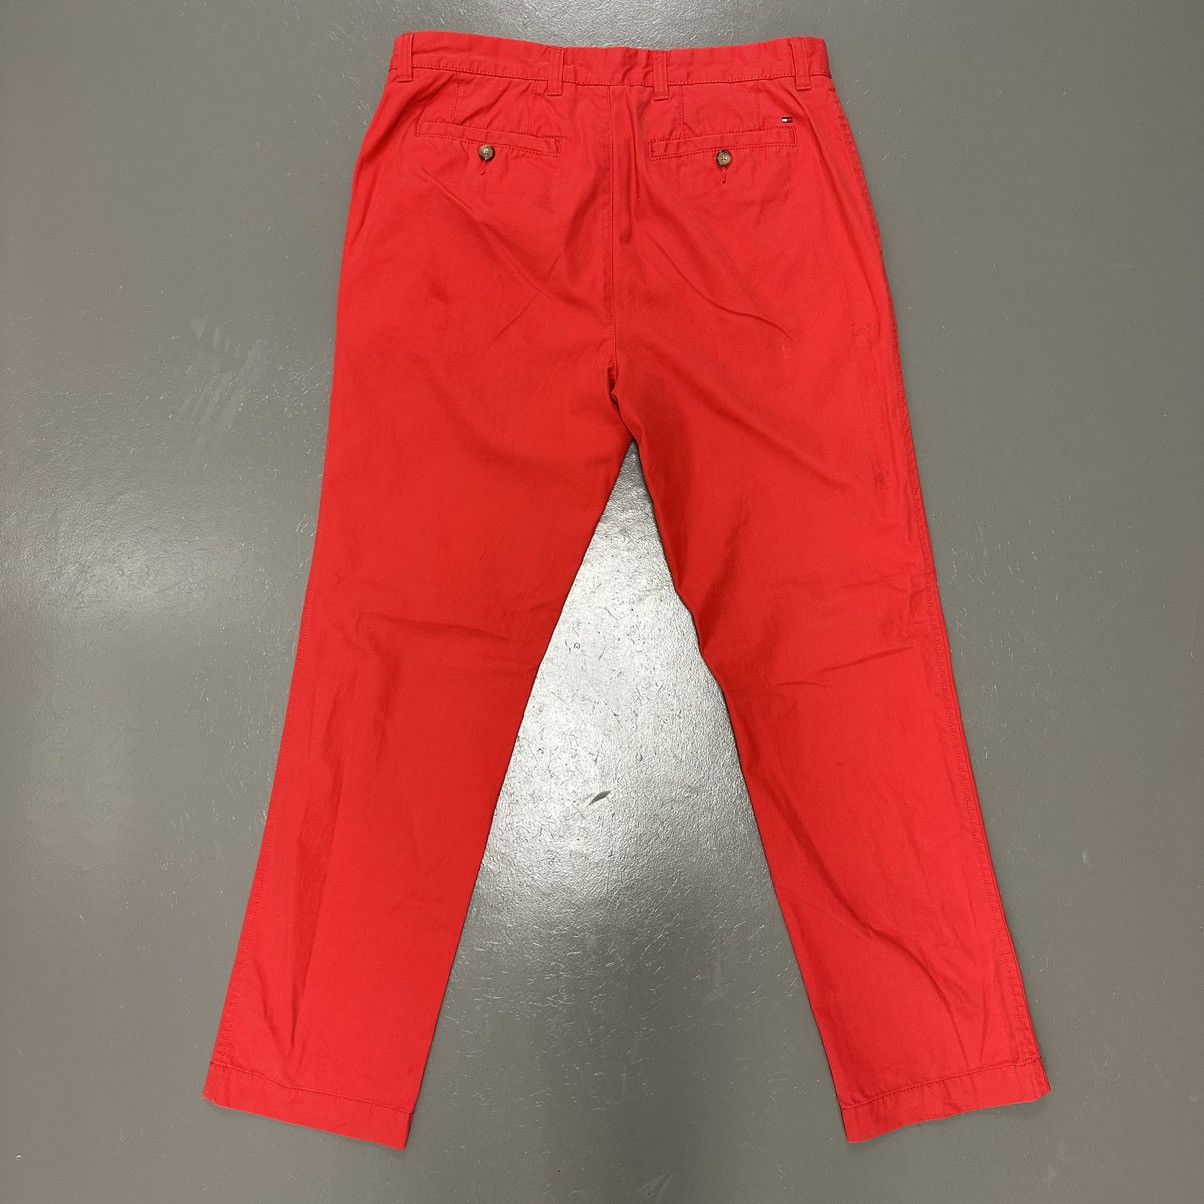 Vintage 2000s Tommy Hilfiger Chino Pants - 2